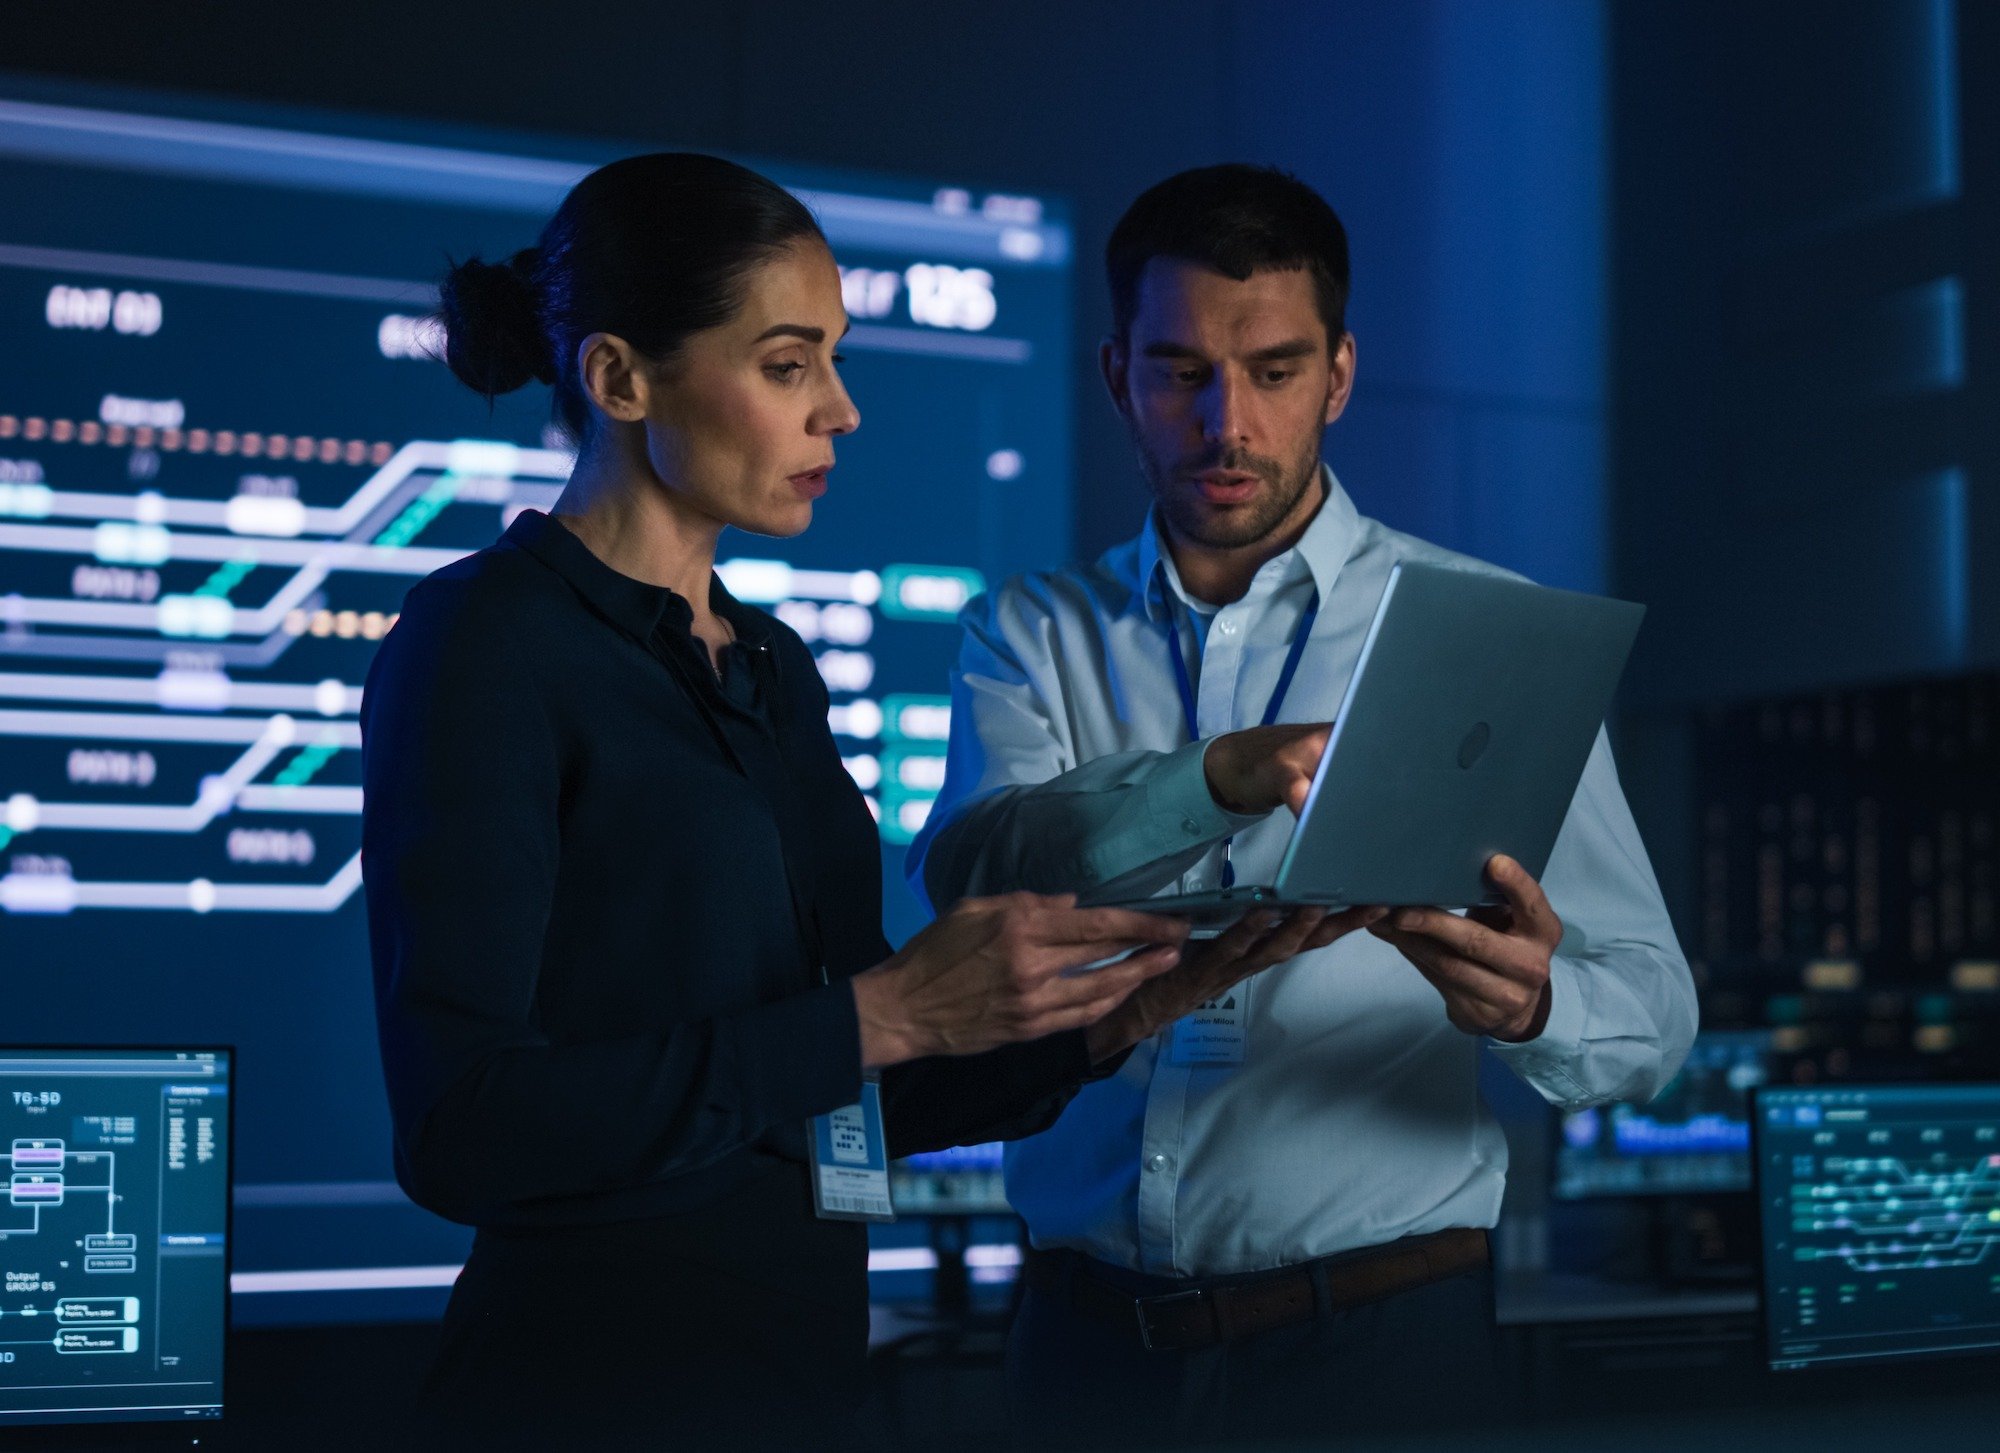 Two people in a data center looking at a laptop